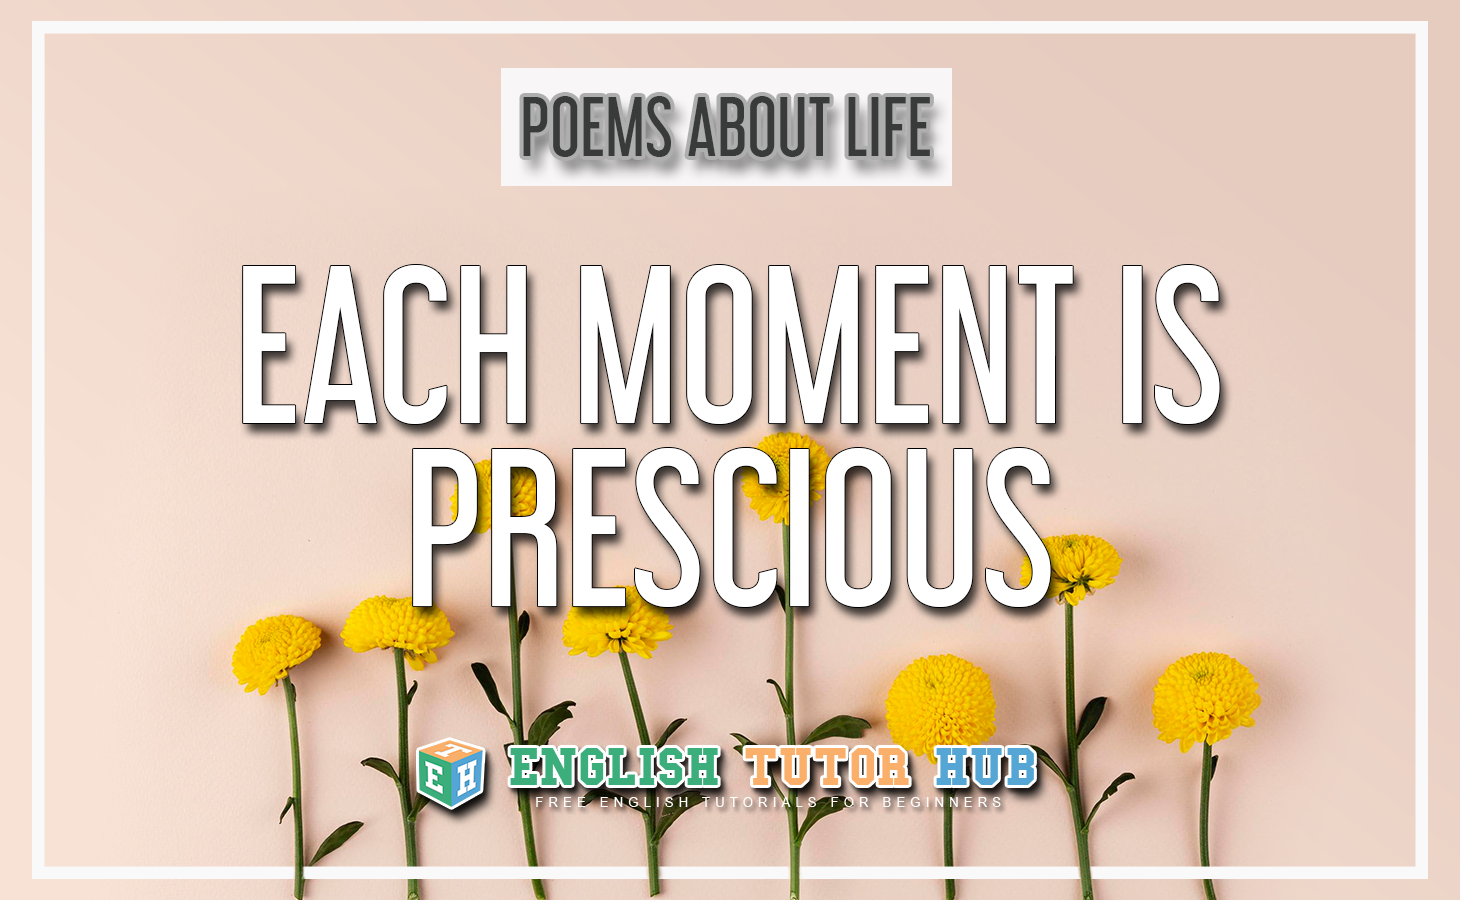 Poems About Life - Each Moment is Prescious